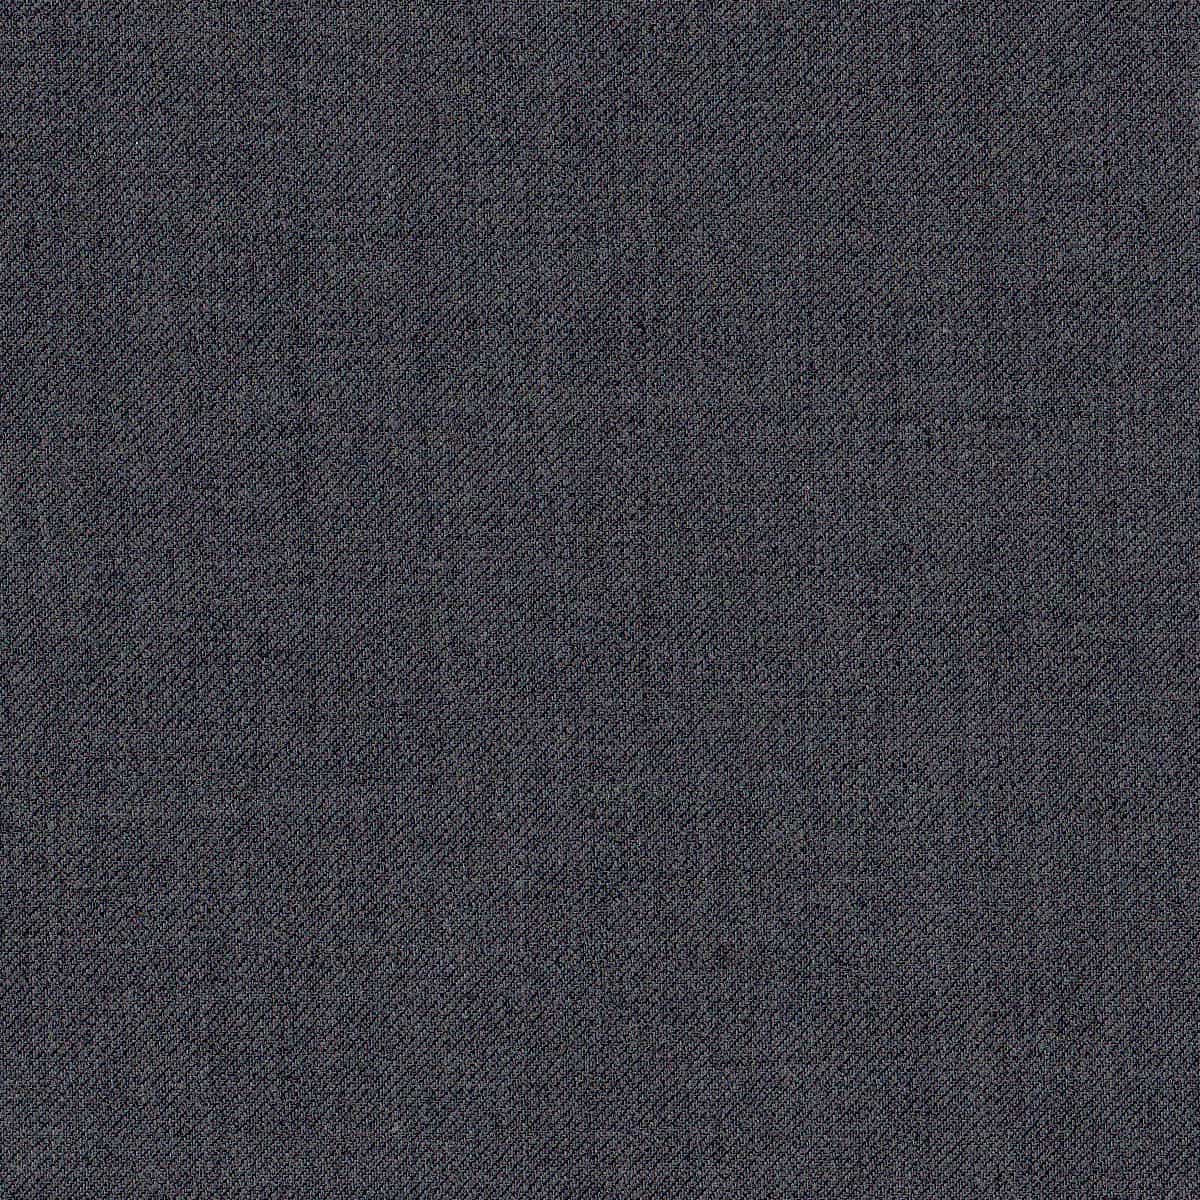 grey wool fabric for men's suit